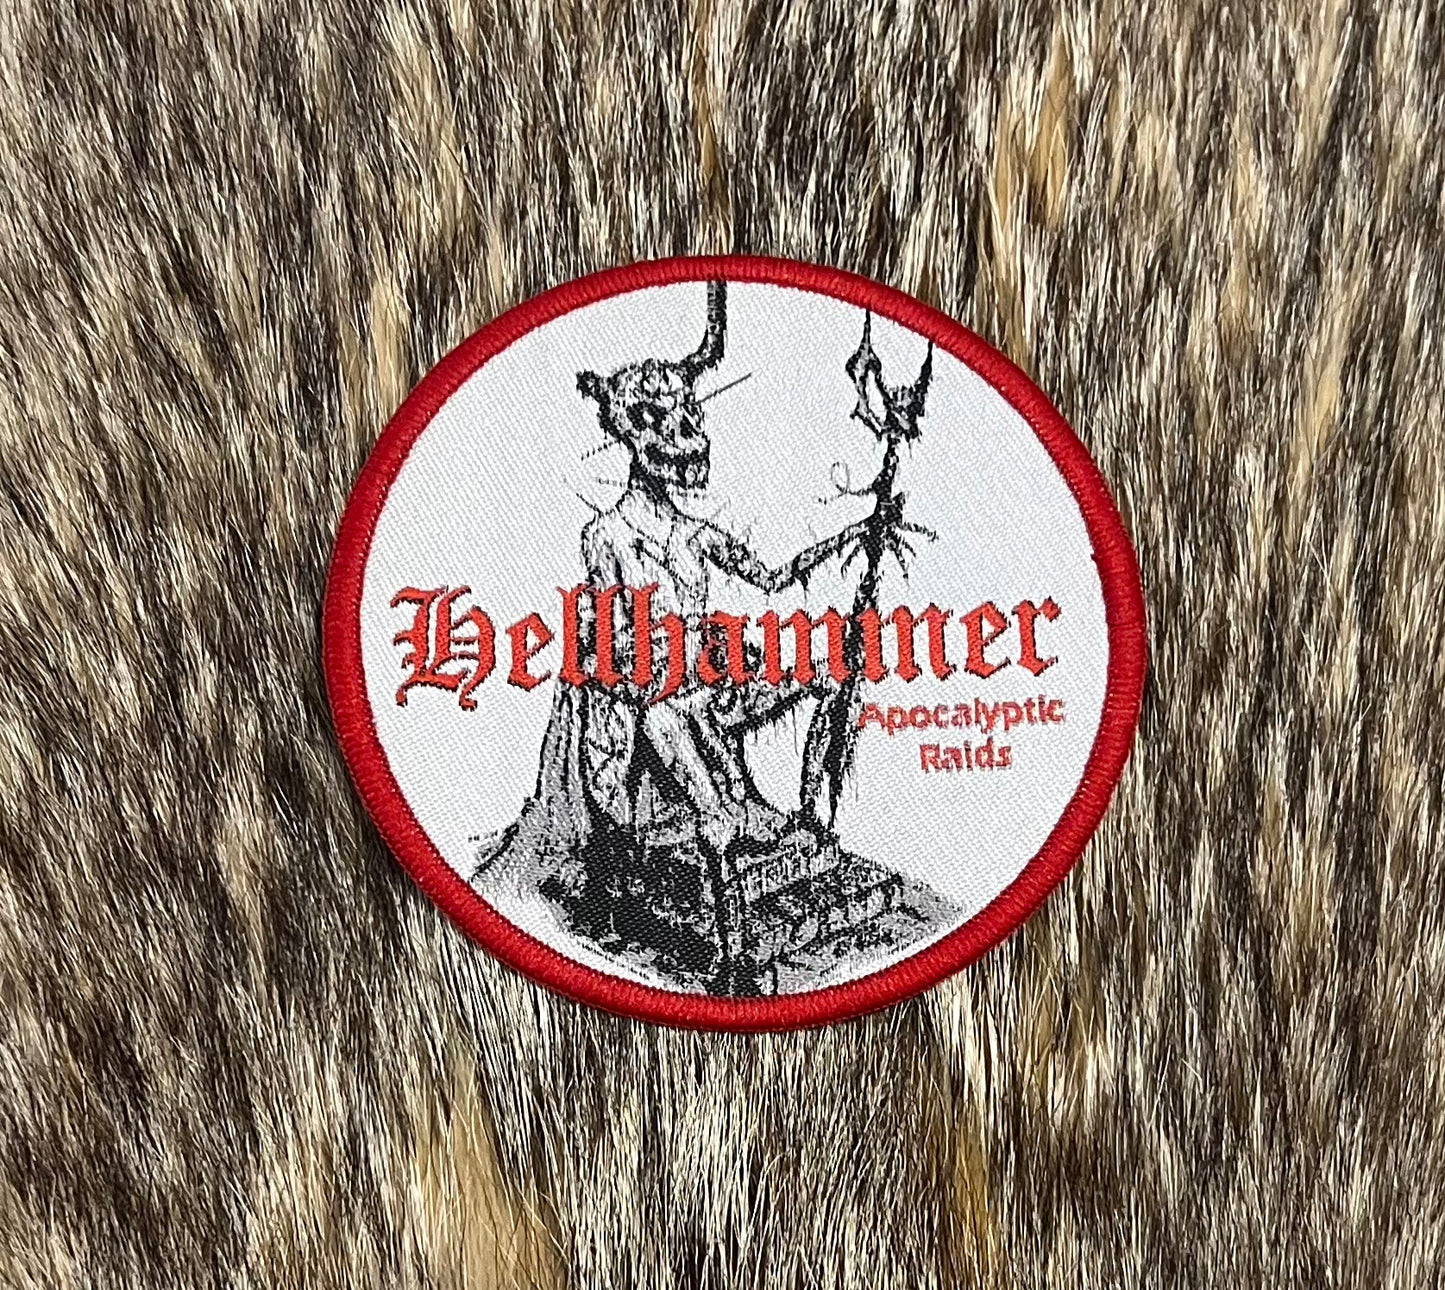 Hellhammer - Apocalyptic Raids Circular Patch